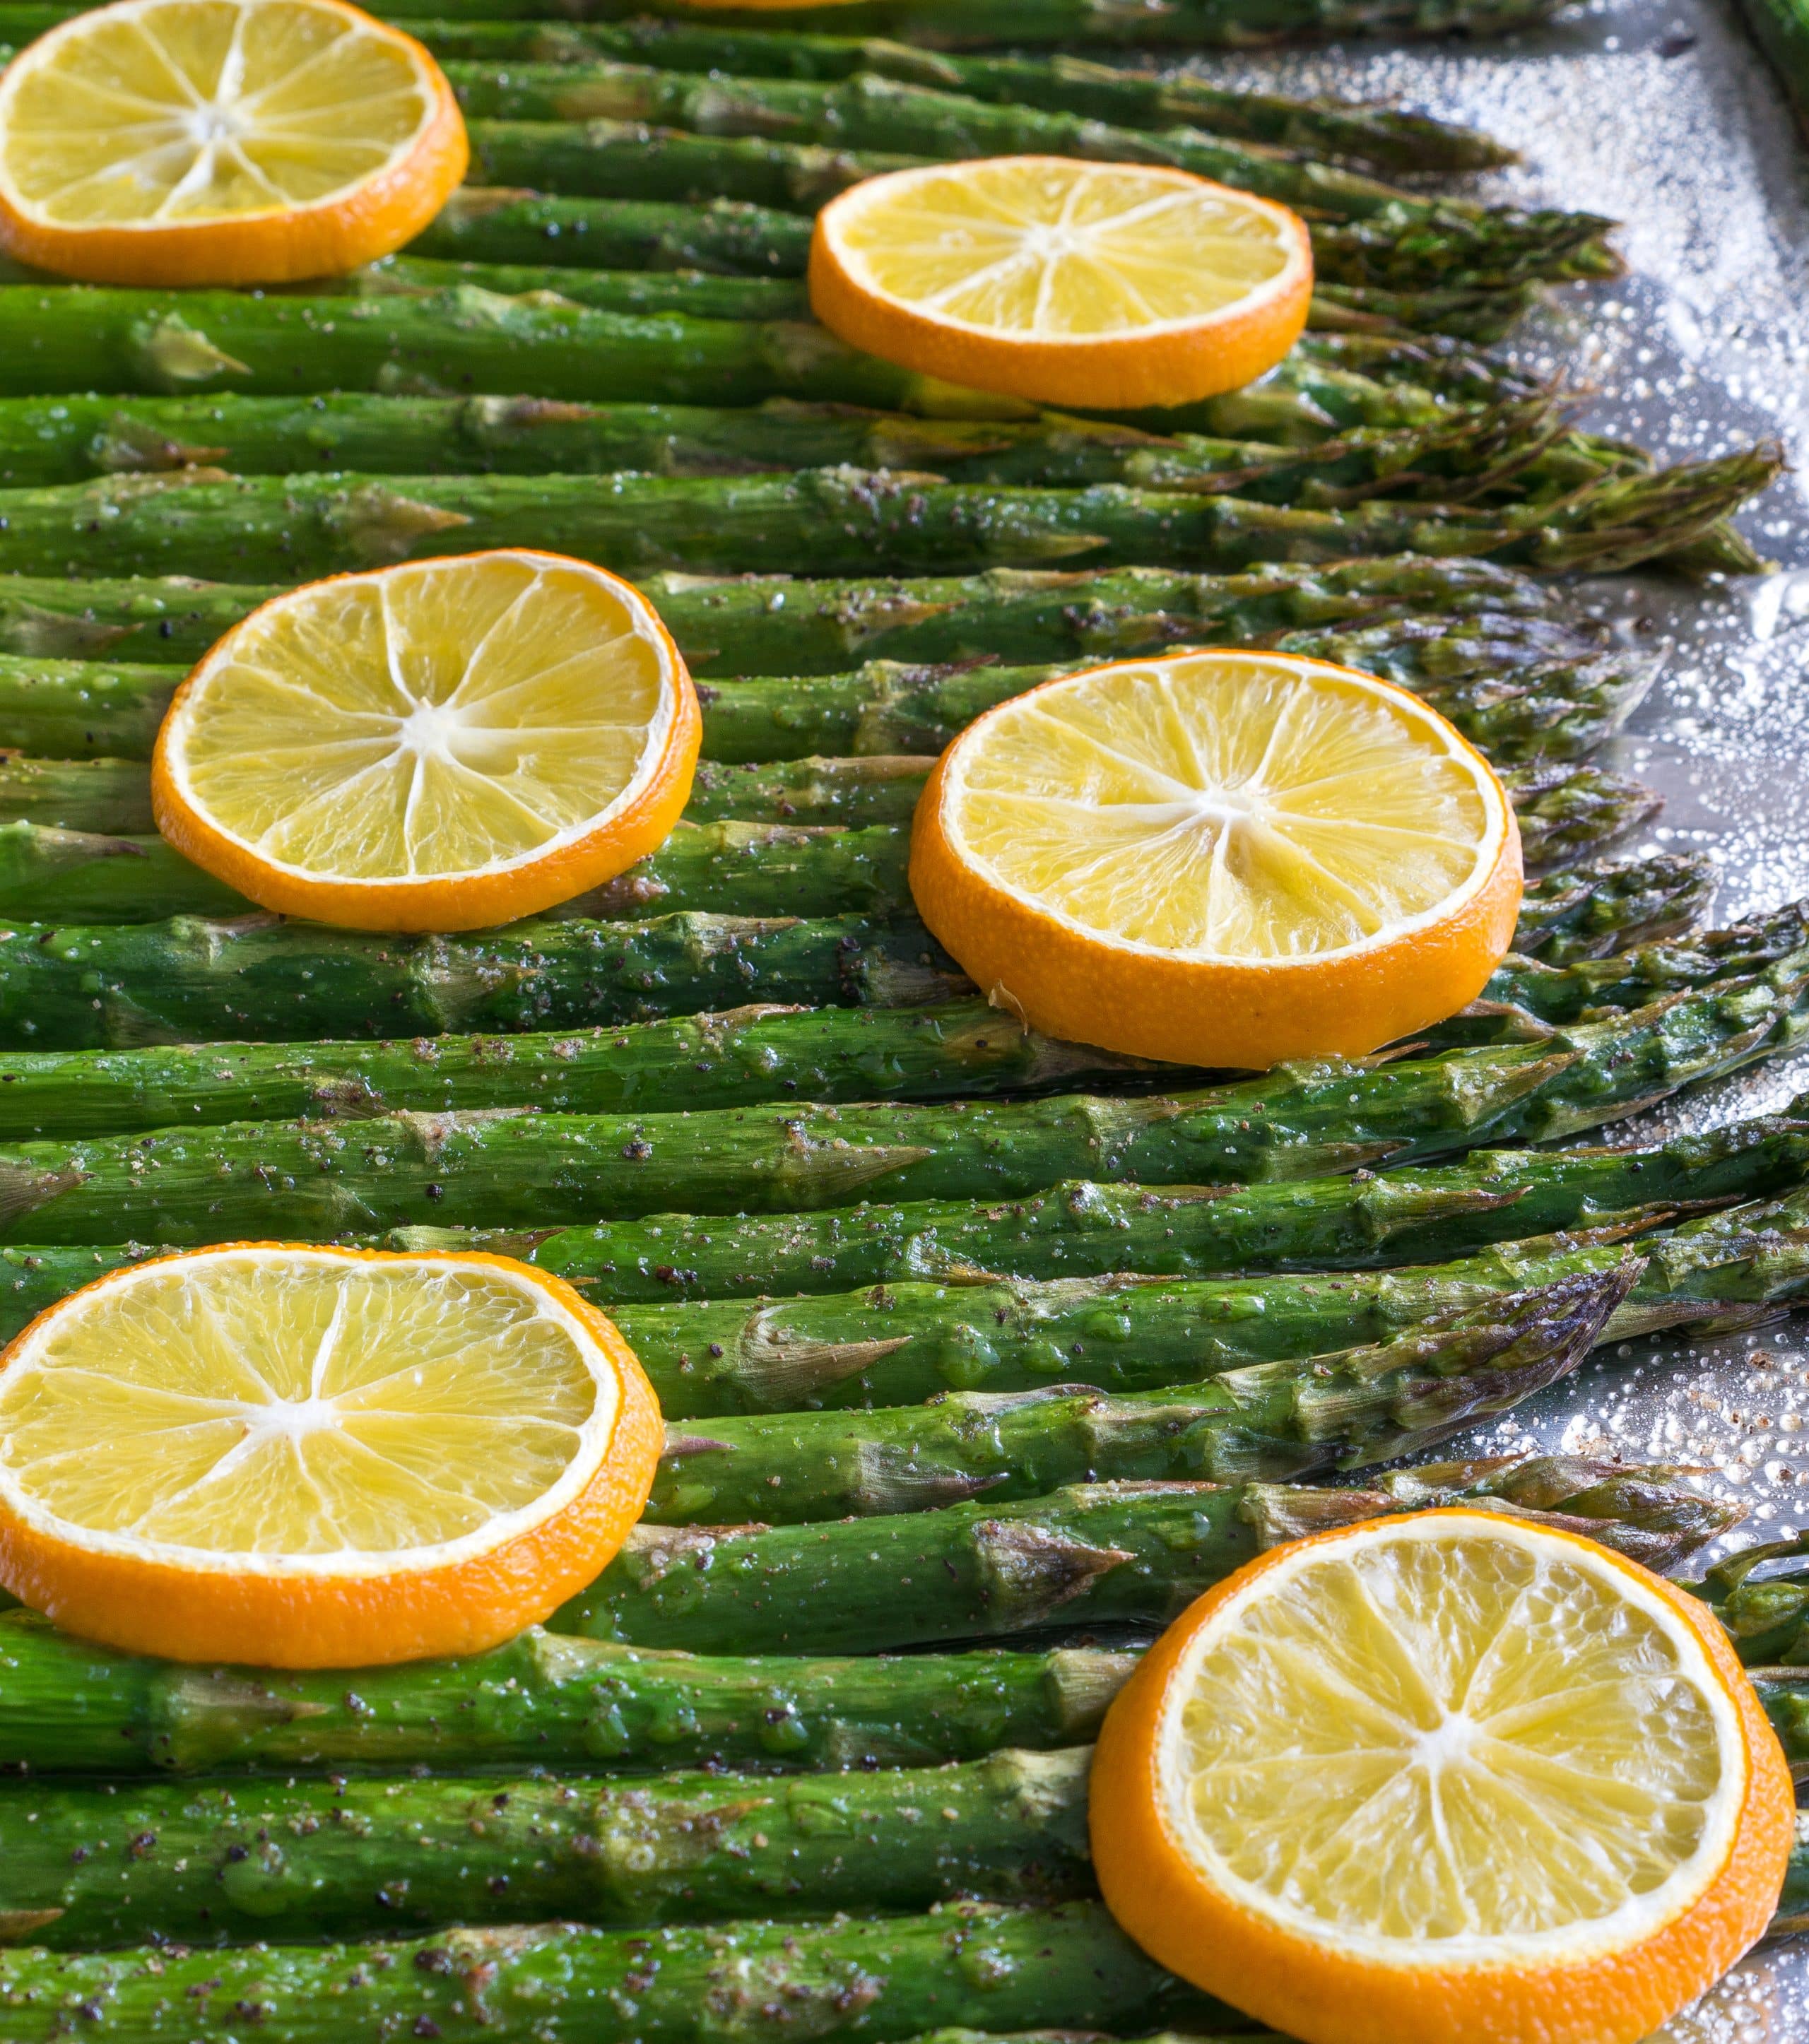 Baked Lemon Pepper Asparagus – Simple recipe for Baked Lemon Pepper Asparagus using fresh asparagus, extra virgin olive oil, salt, pepper, and fresh lemon slices. All you need is a hot oven, 5 ingredients, a sheet pan, and 20 minutes. We love making this part of our healthy weekly meal prep! Gluten free, vegan, & paleo-friendly. ♥ | freeyourfork.com